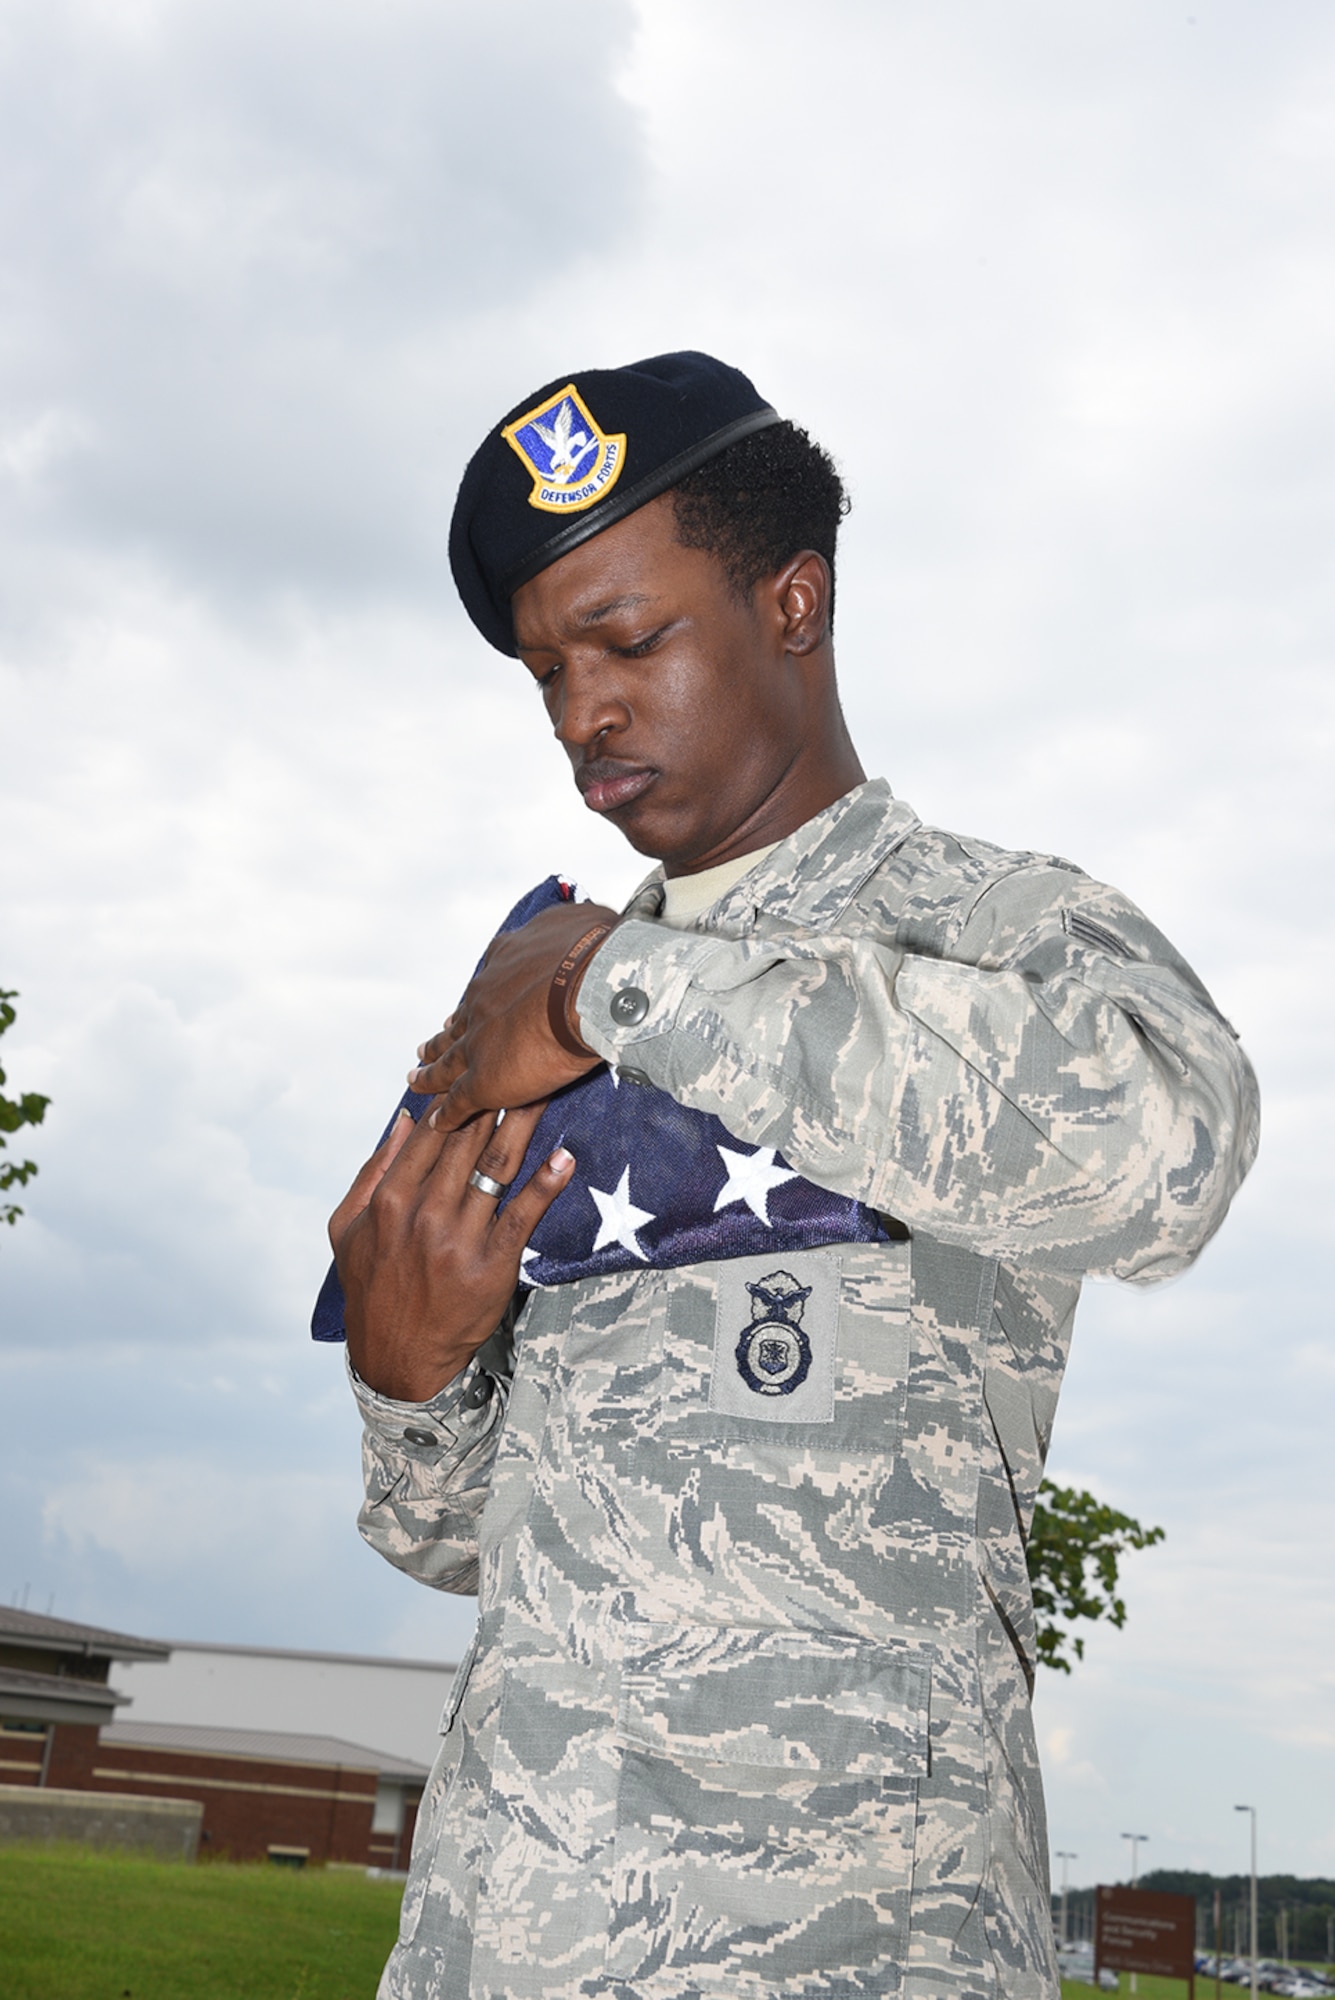 Senior Airman Scott folds the American flag in accordance with customs during Retreat on August 7, 2016 at Memphis Air National Guard Base in Memphis, TN. (U.S. Air National Guard photo by Master Sergeant Danial Mosher/Released)